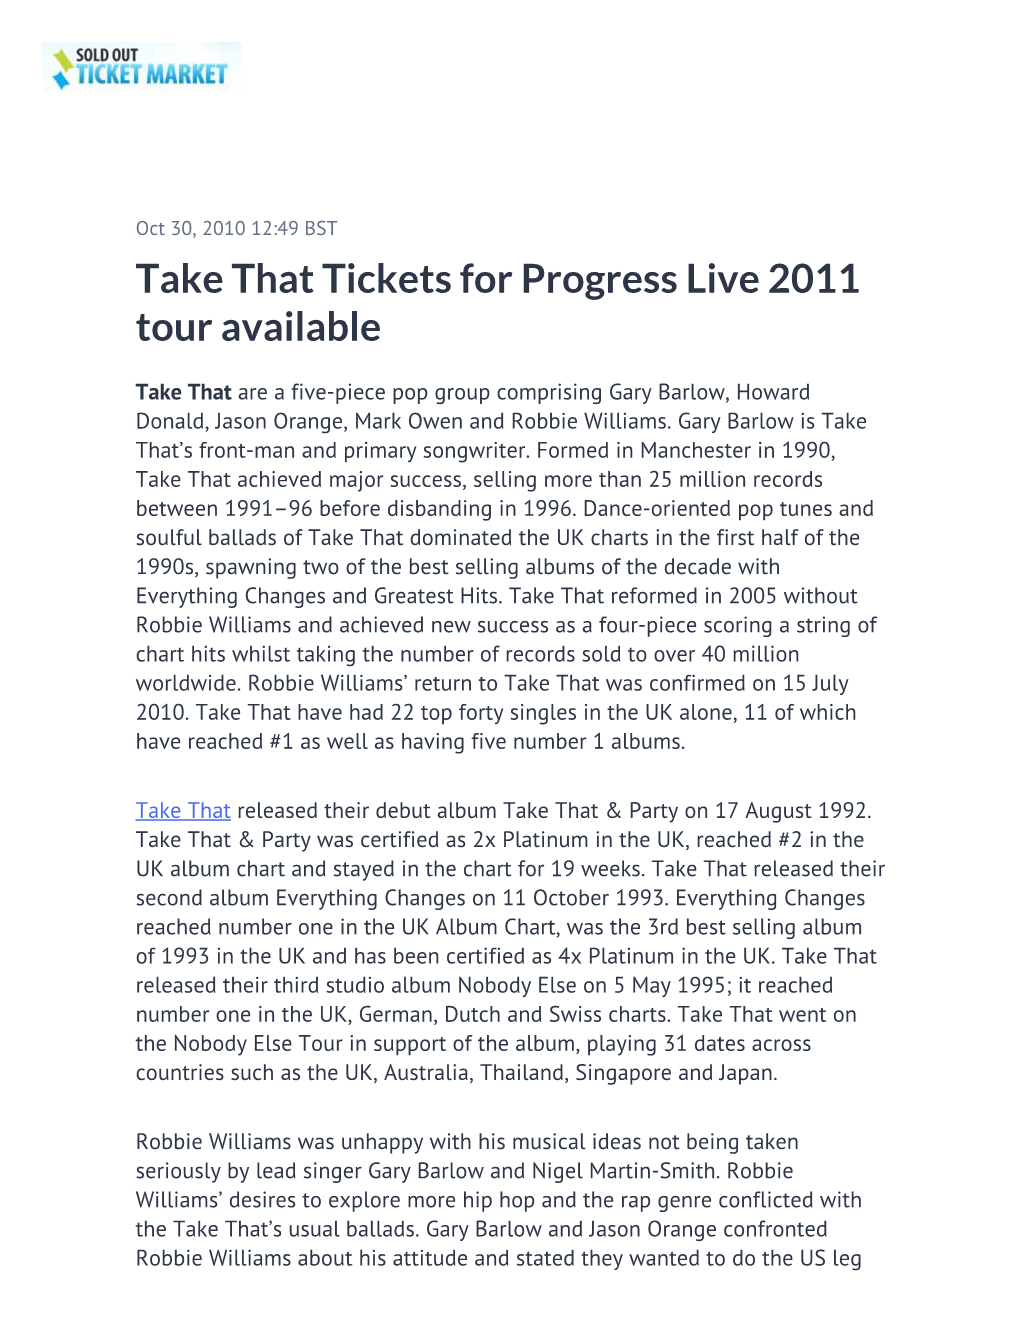 Take That Tickets for Progress Live 2011 Tour Available